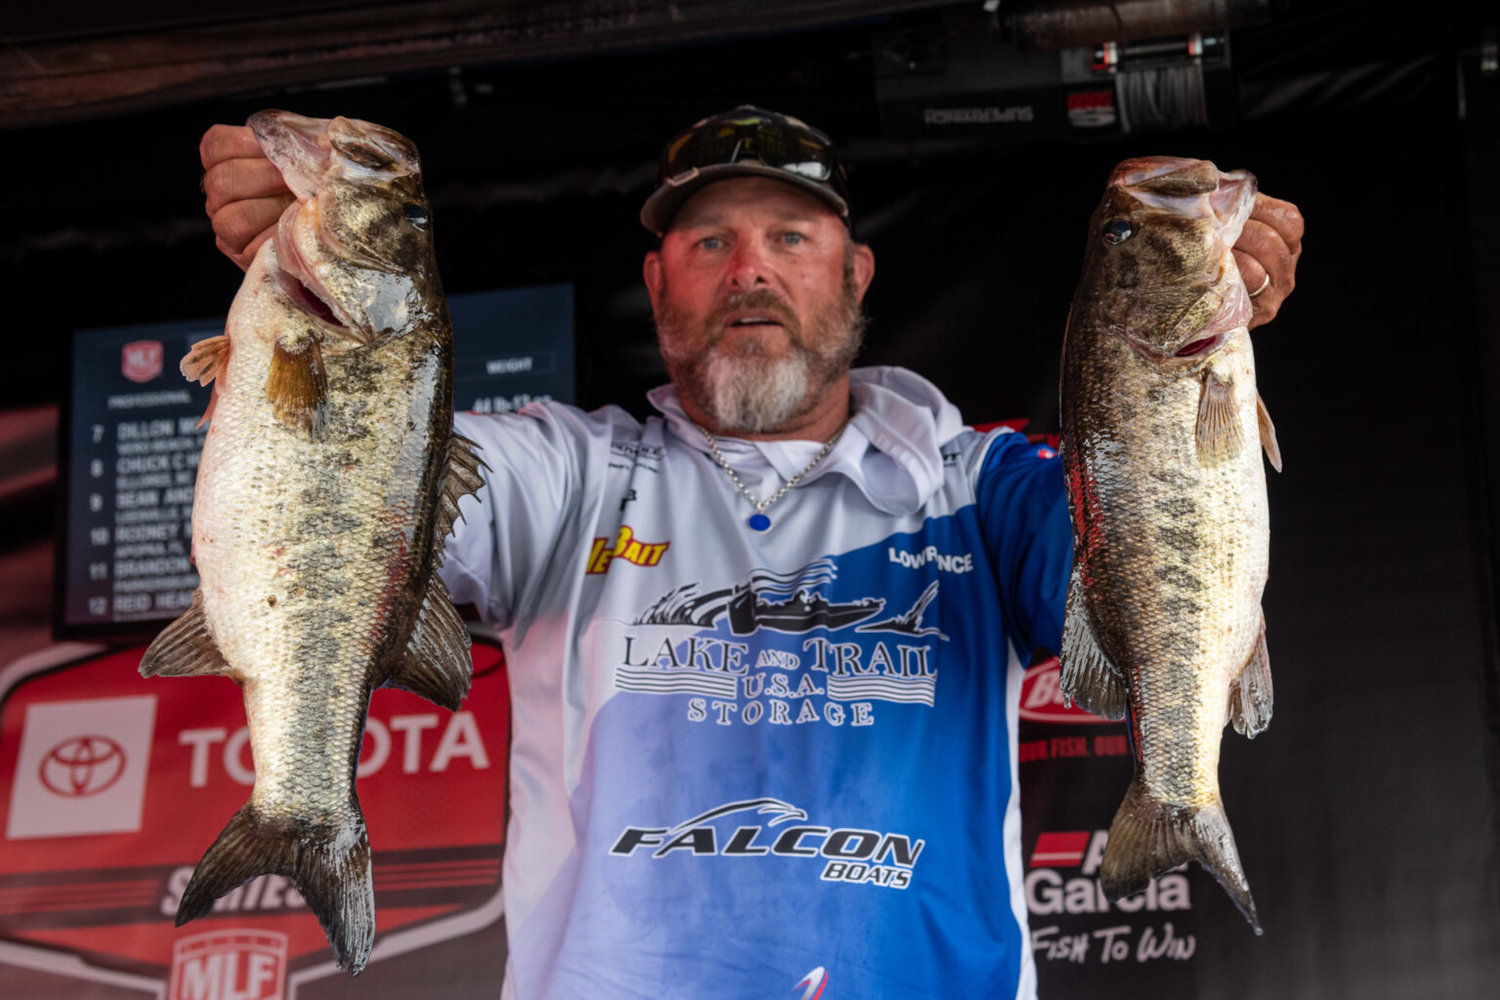 CLEWISTON -- Rob Branagh of Malabar brought a final-day total of five bass weighing 19 pounds, 11 ounces to the scale on Saturday, Feb. 5, to win the season-opening Toyota Series Presented by A.R.E. event at Lake Okeechobee .